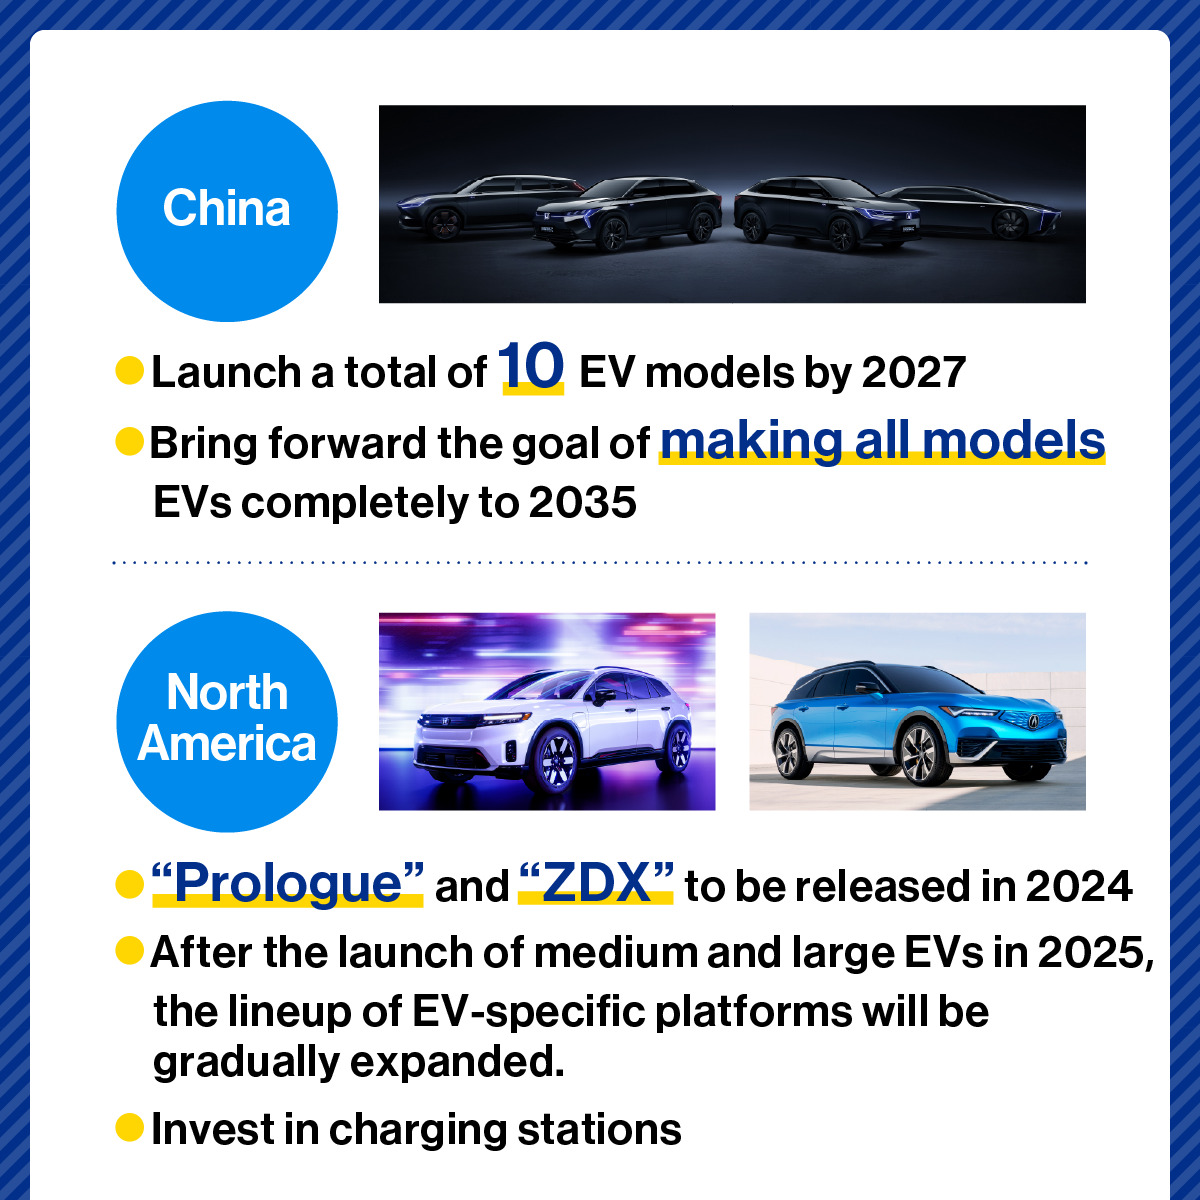 Four-wheel electrification strategy for China and North America